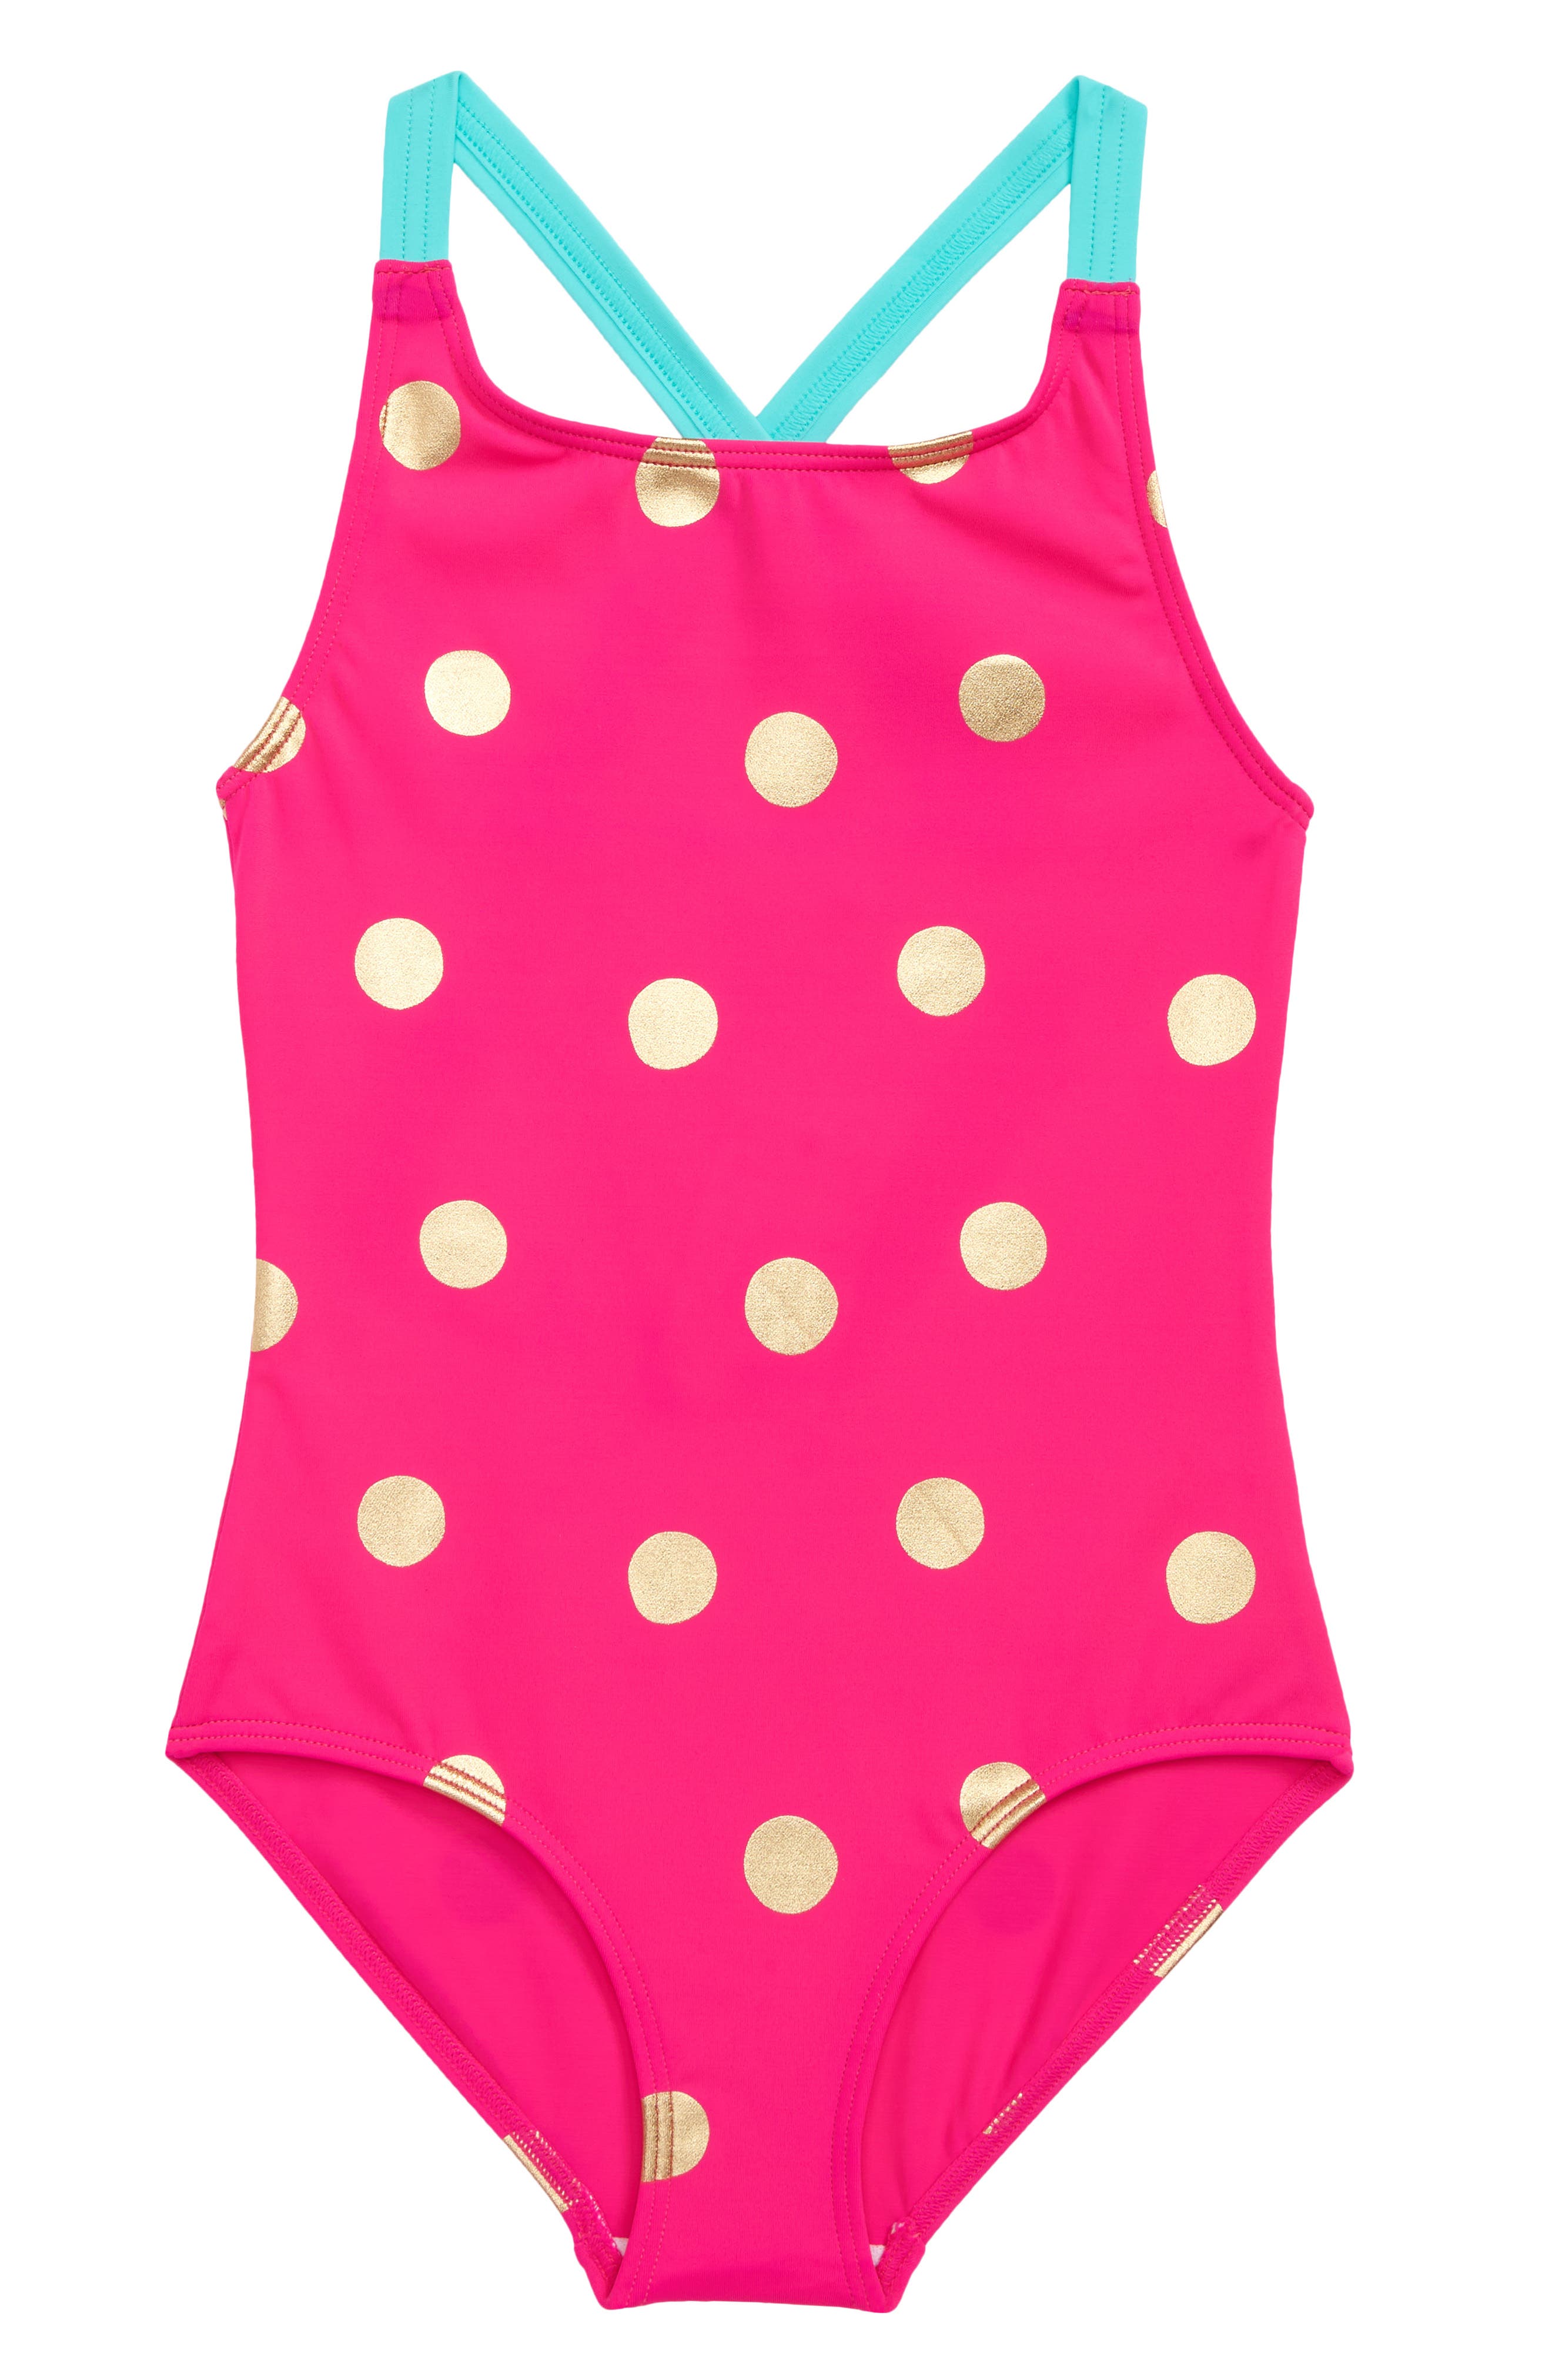 NWT Crewcuts Nordstrom Toddler Girls One-Piece Bathing Suit Pink Sz 4-5 $39.50 